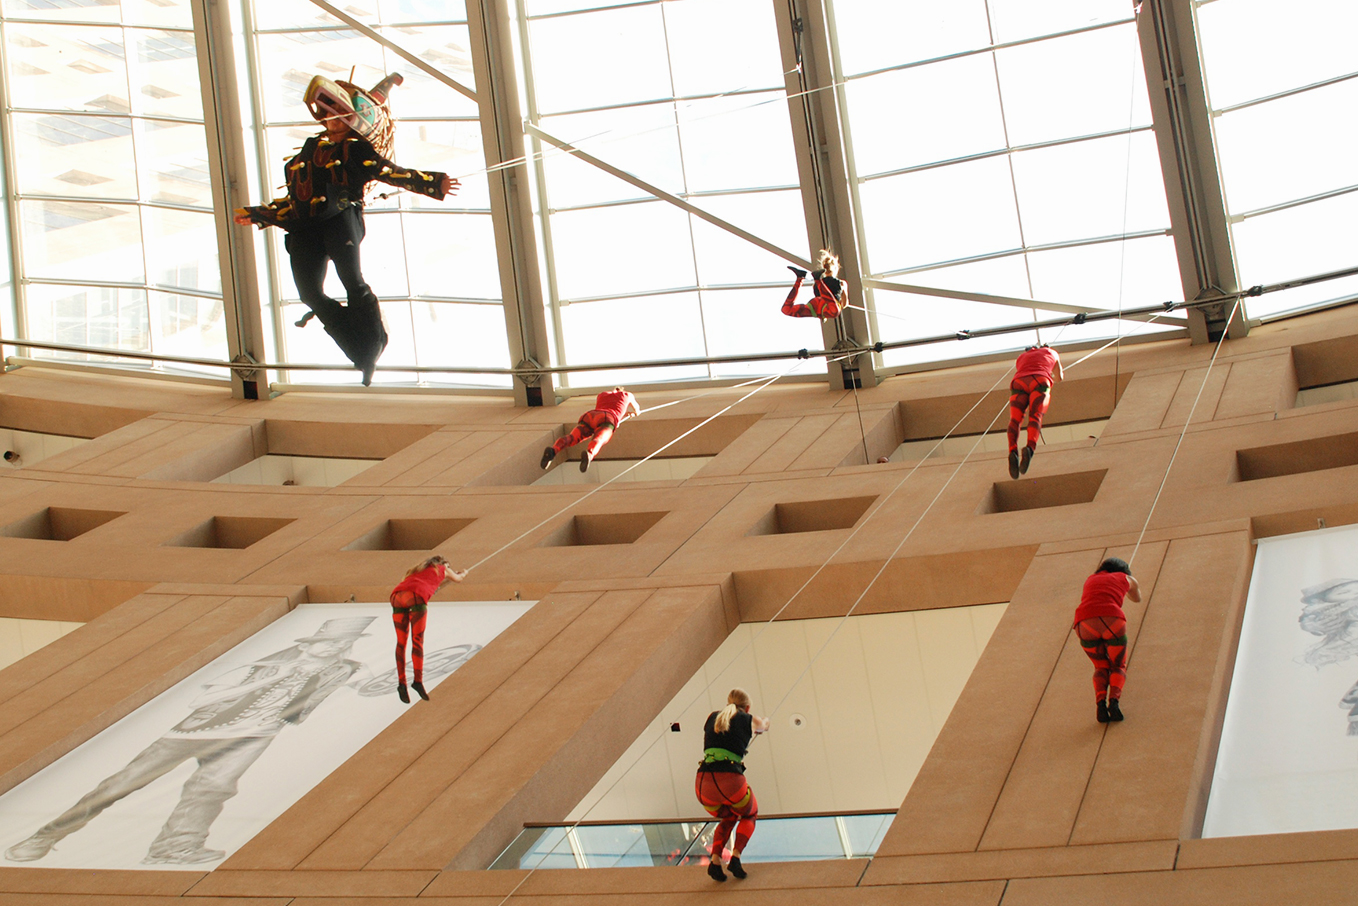 Julia Taffe's Aeriosa dancers suspended from the ceiling of the Main Branch of the Vancouver Public Library.